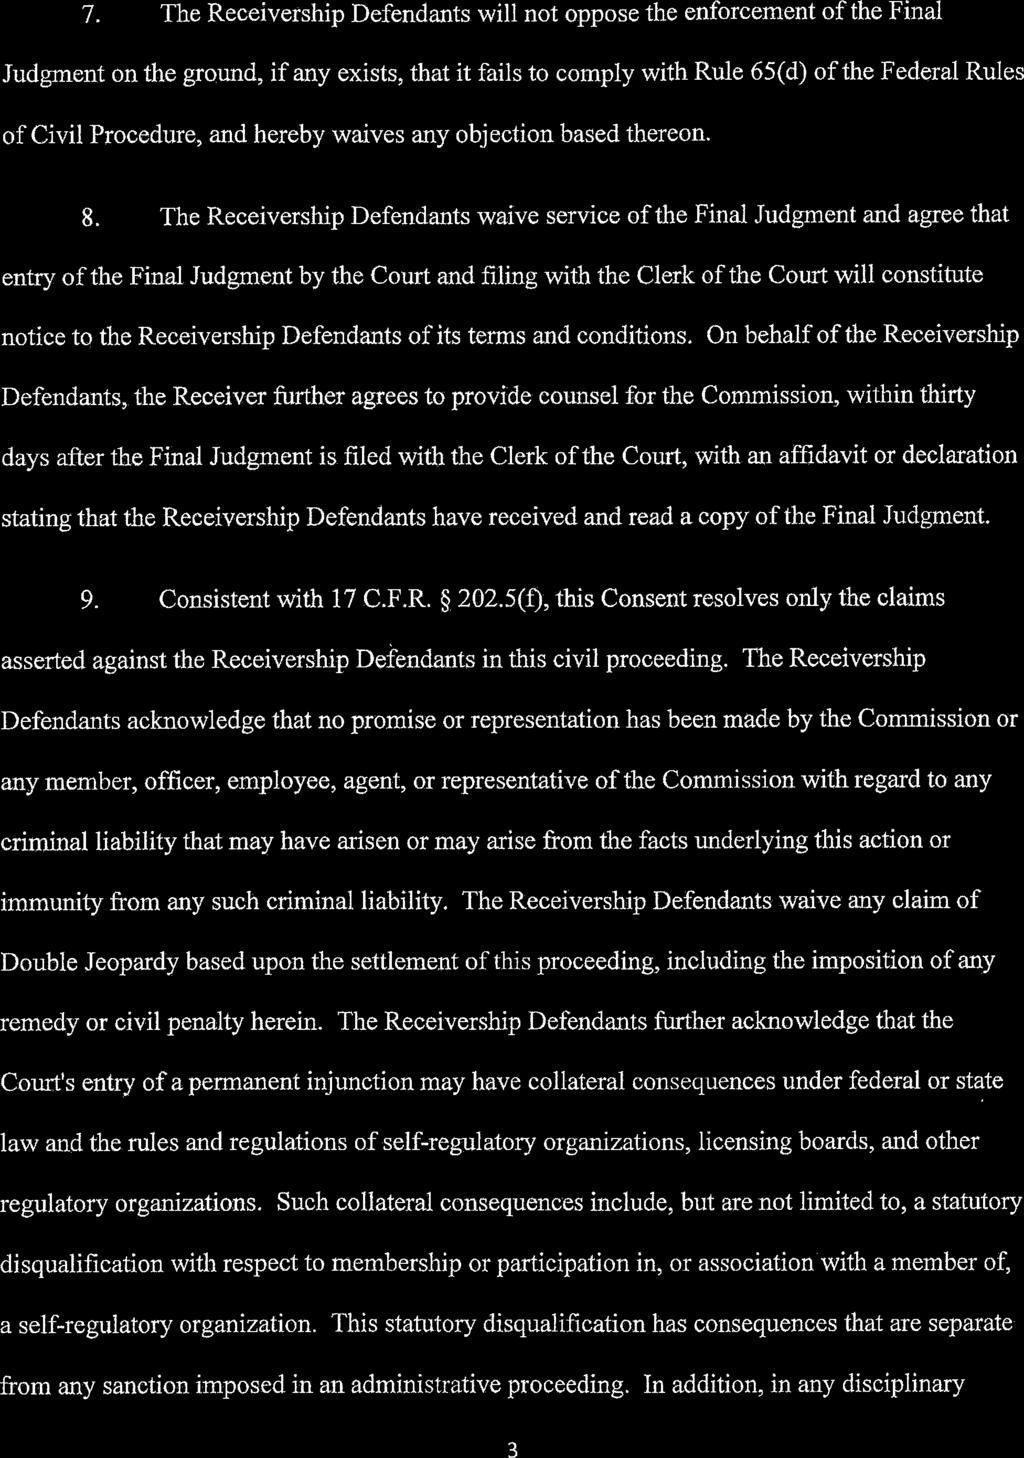 Case 1:14-cv-01002-CRC Document 238 Filed 03/08/19 Page 3 of 11 7. The Receivership Defendants.